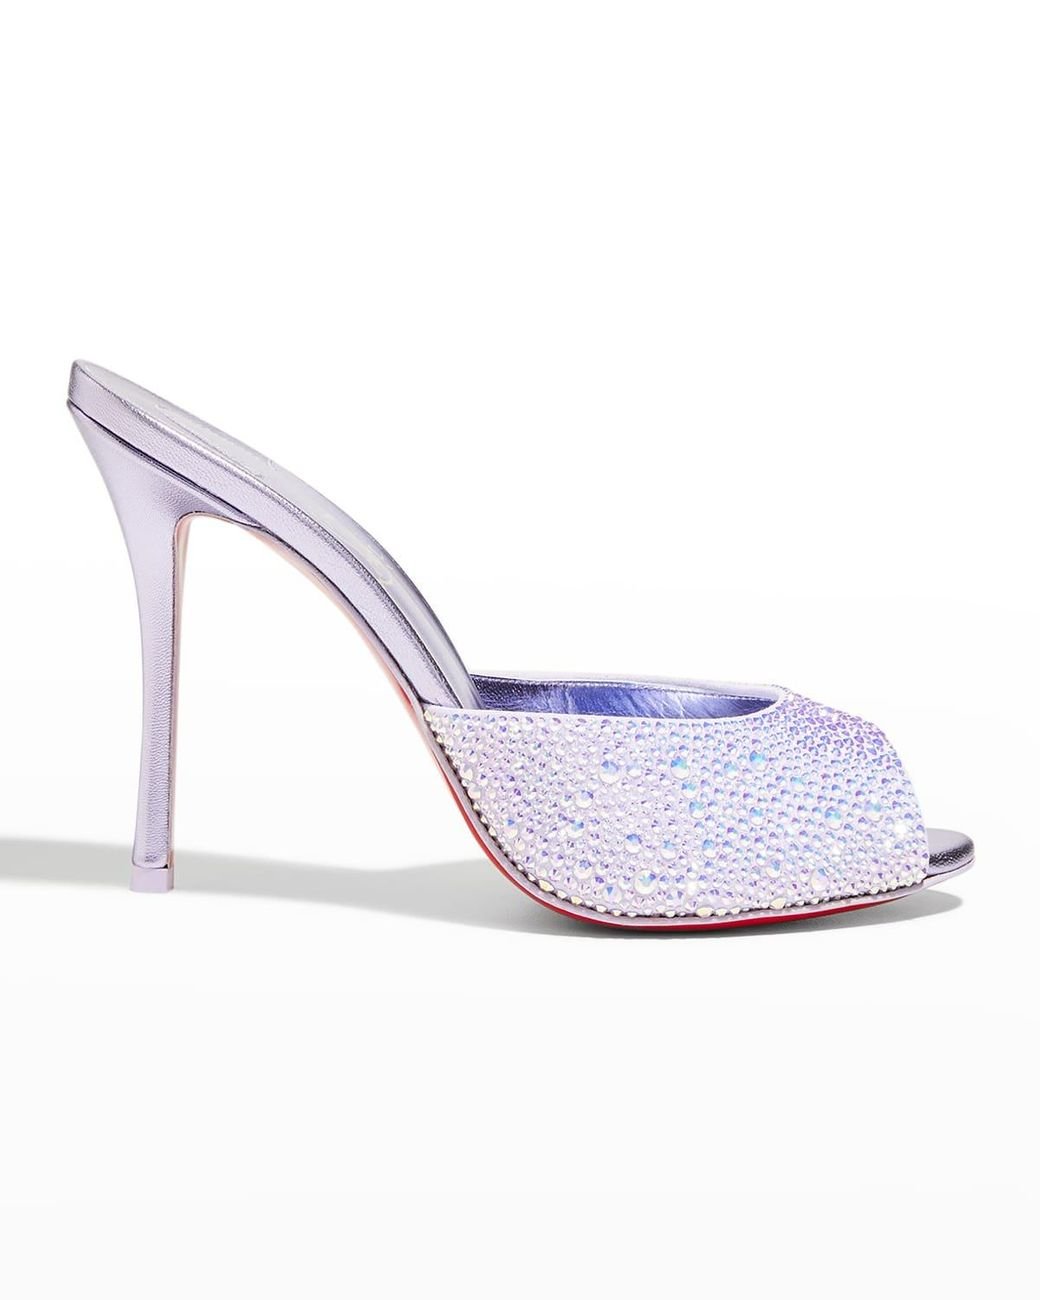 Christian Louboutin Me Dolly Strass Red Sole Slide Sandals in White | Lyst